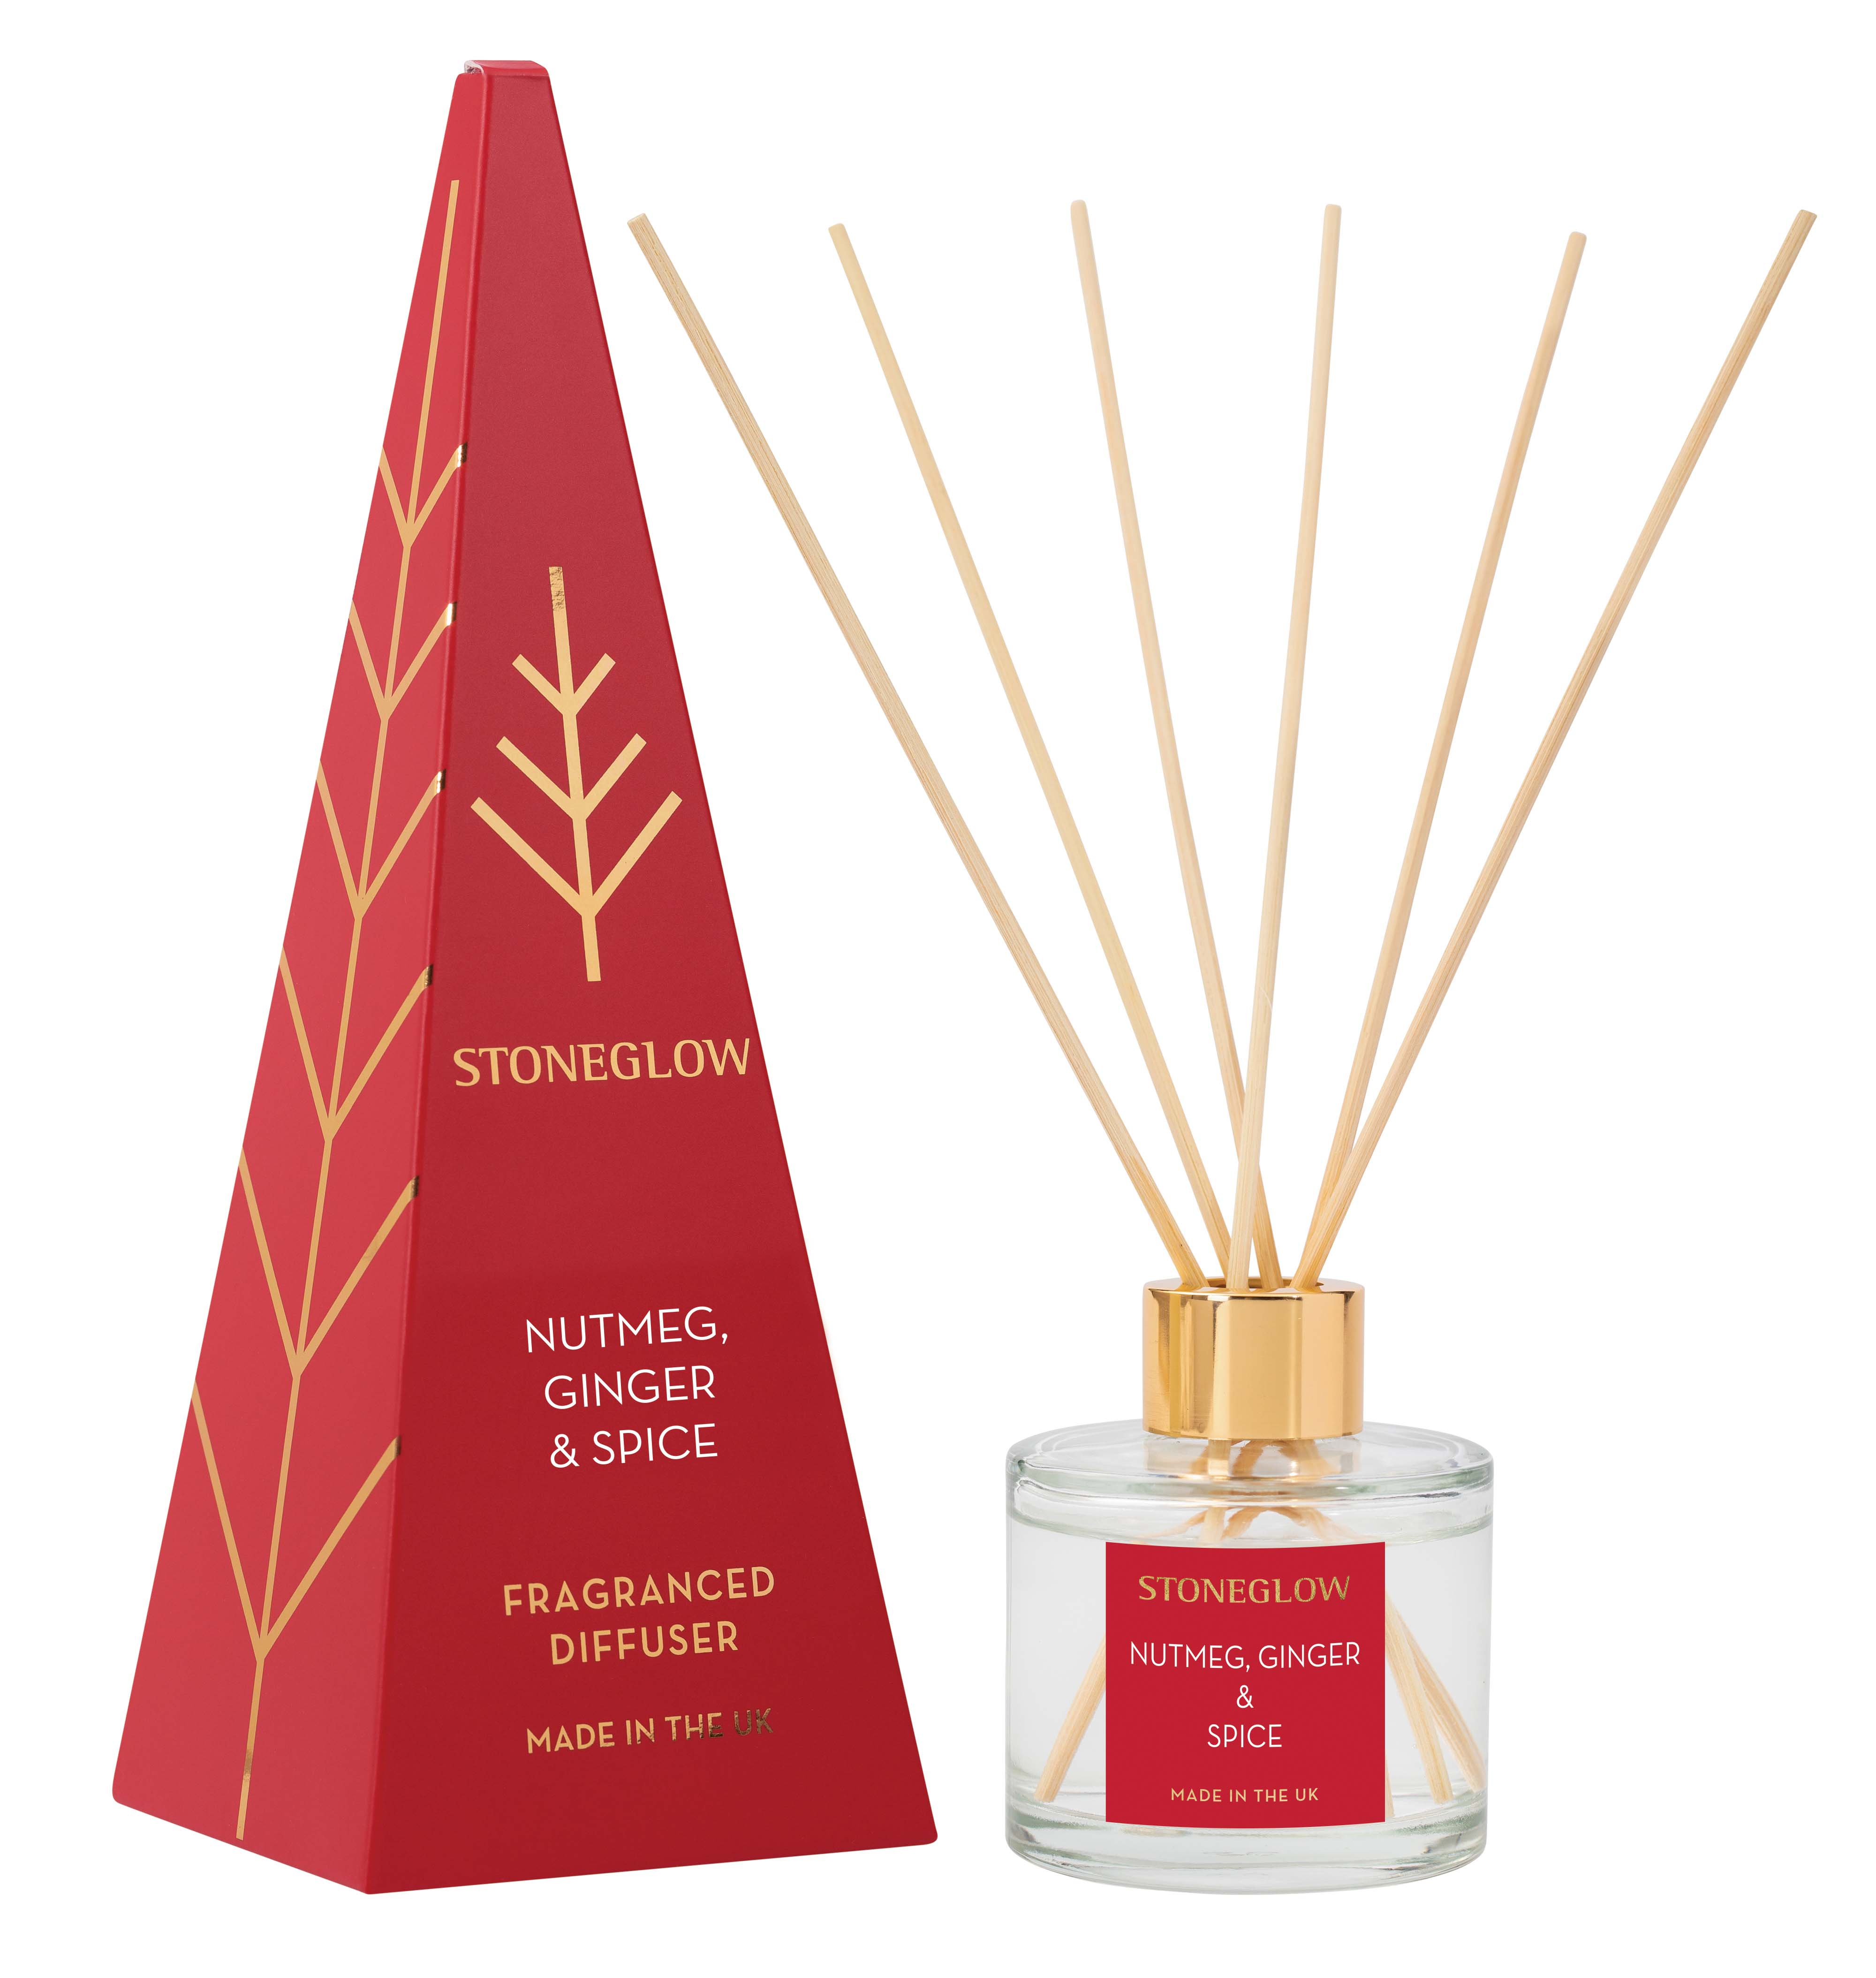 Diffuser Nutmeg Ginger & Spice 120 ml Stoneglow Seasonal Collection